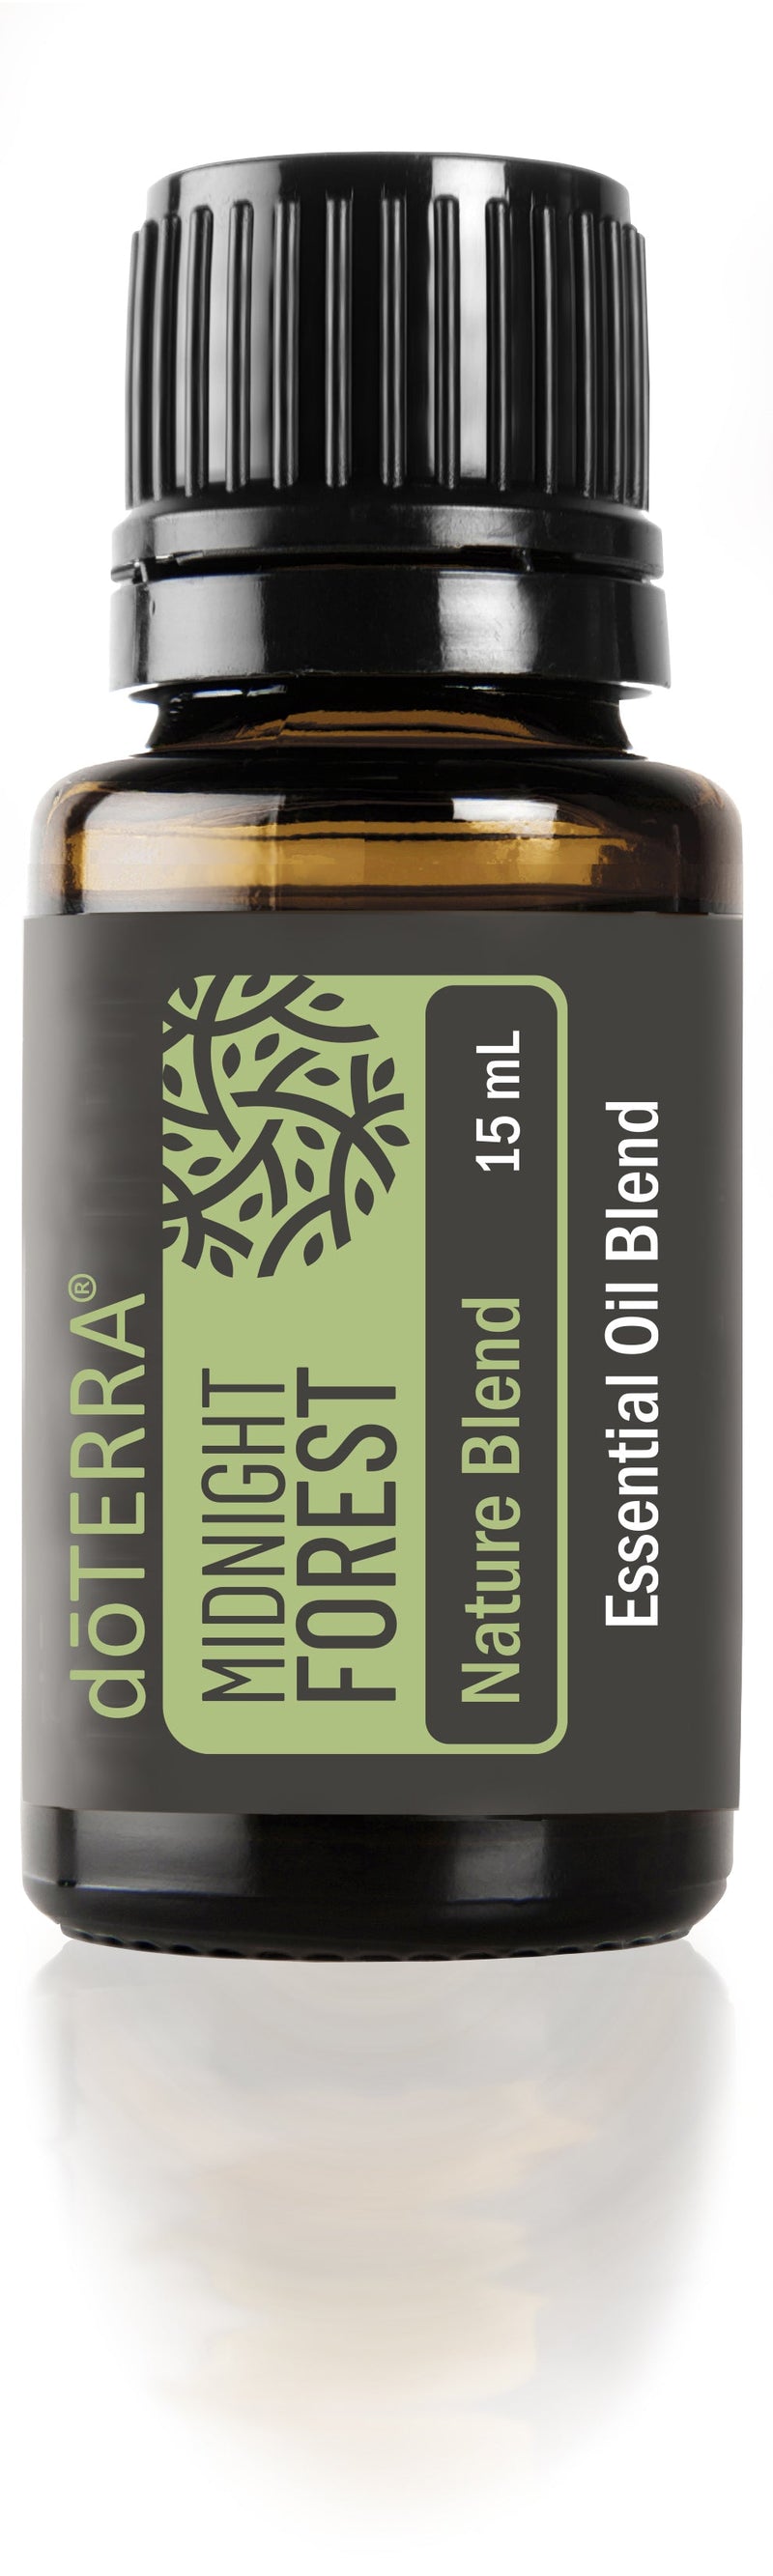 doTerra 15ml Essential Oils (choose your scent)